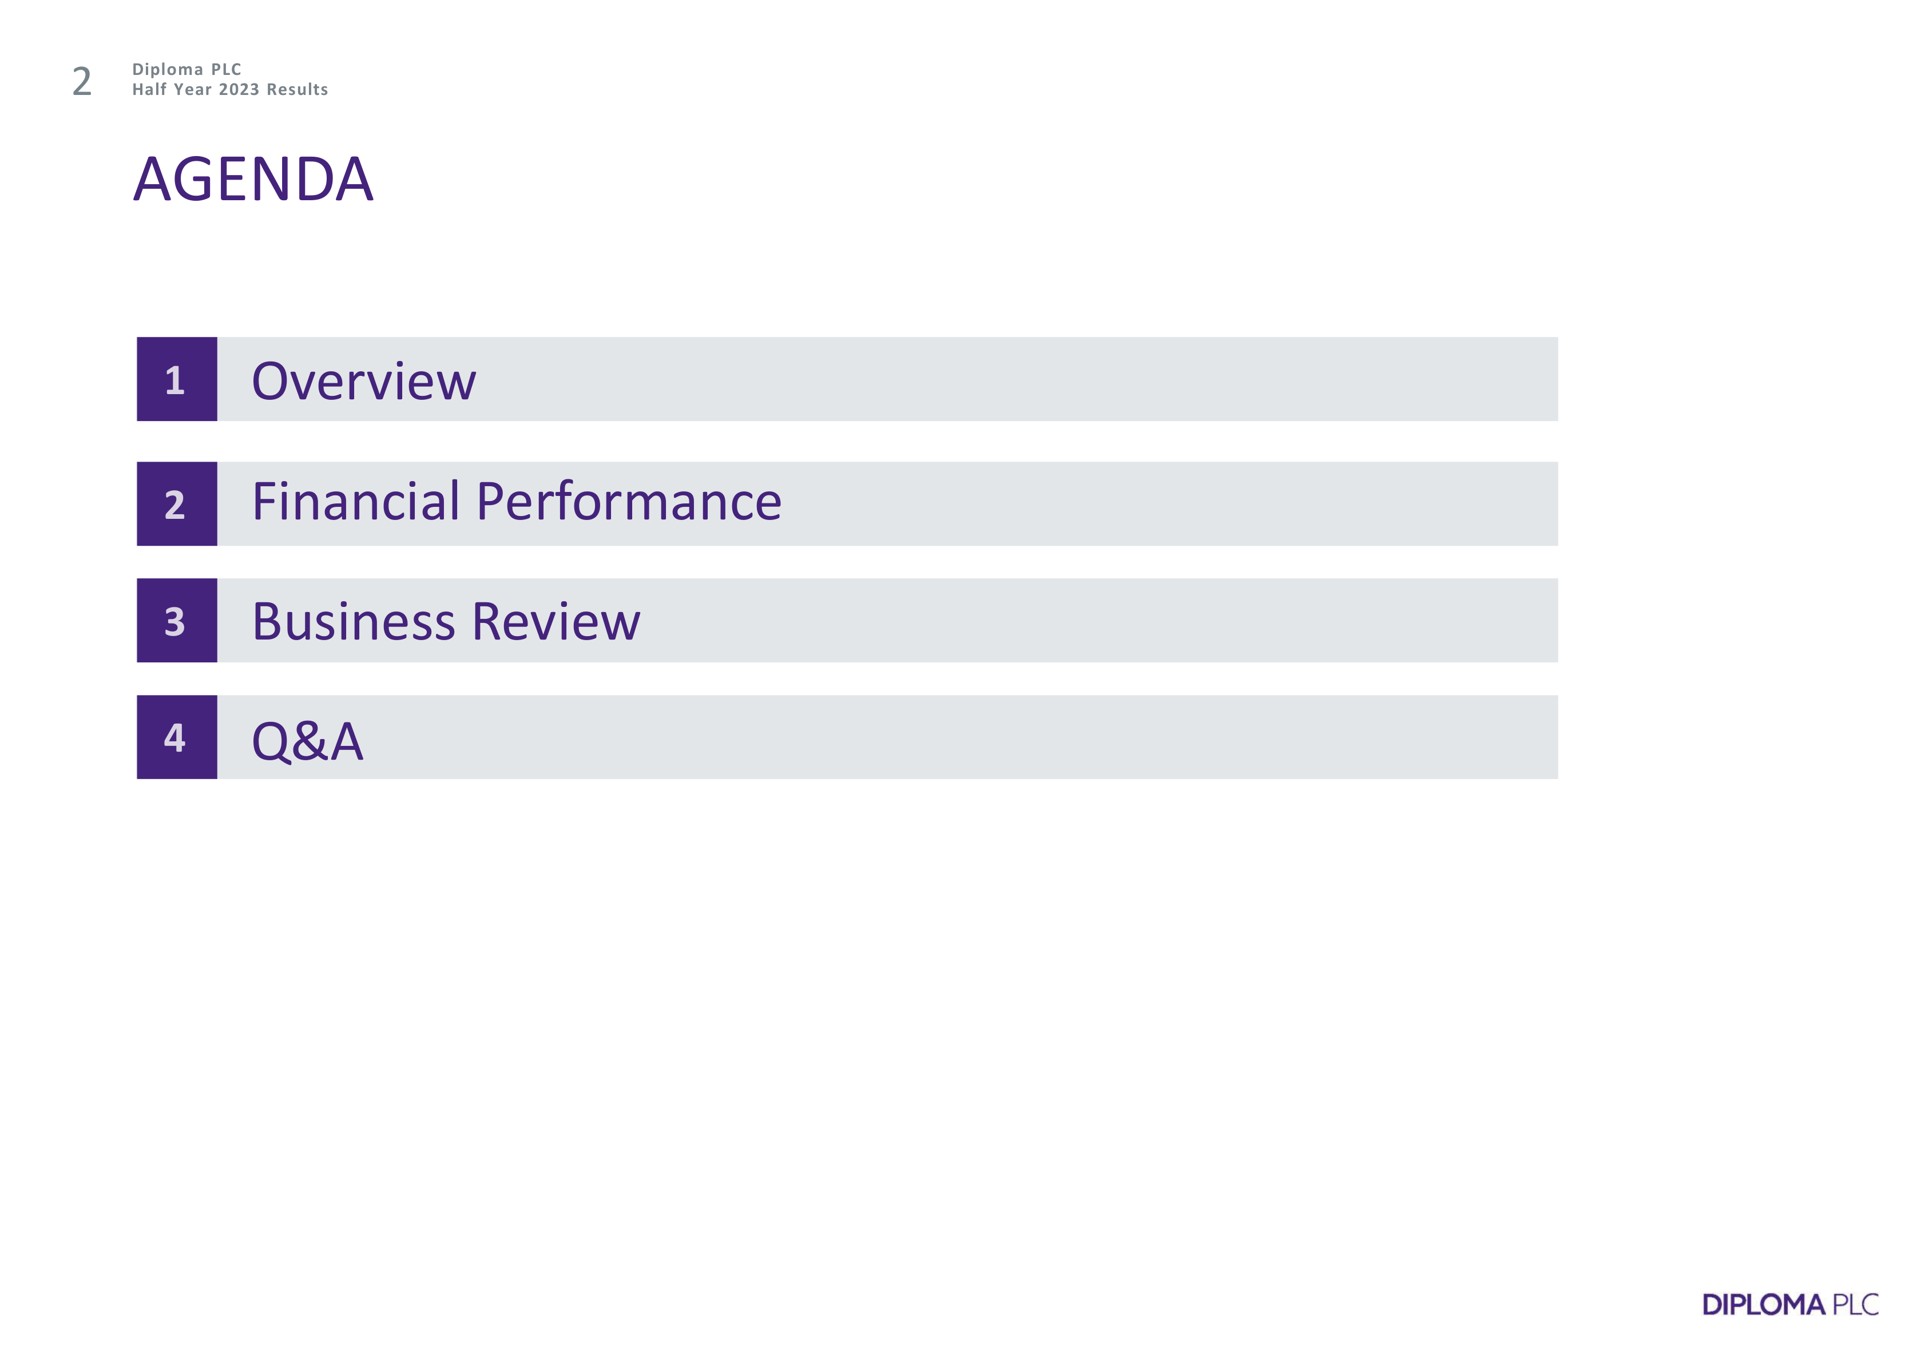 agenda overview financial performance business review a | Diploma